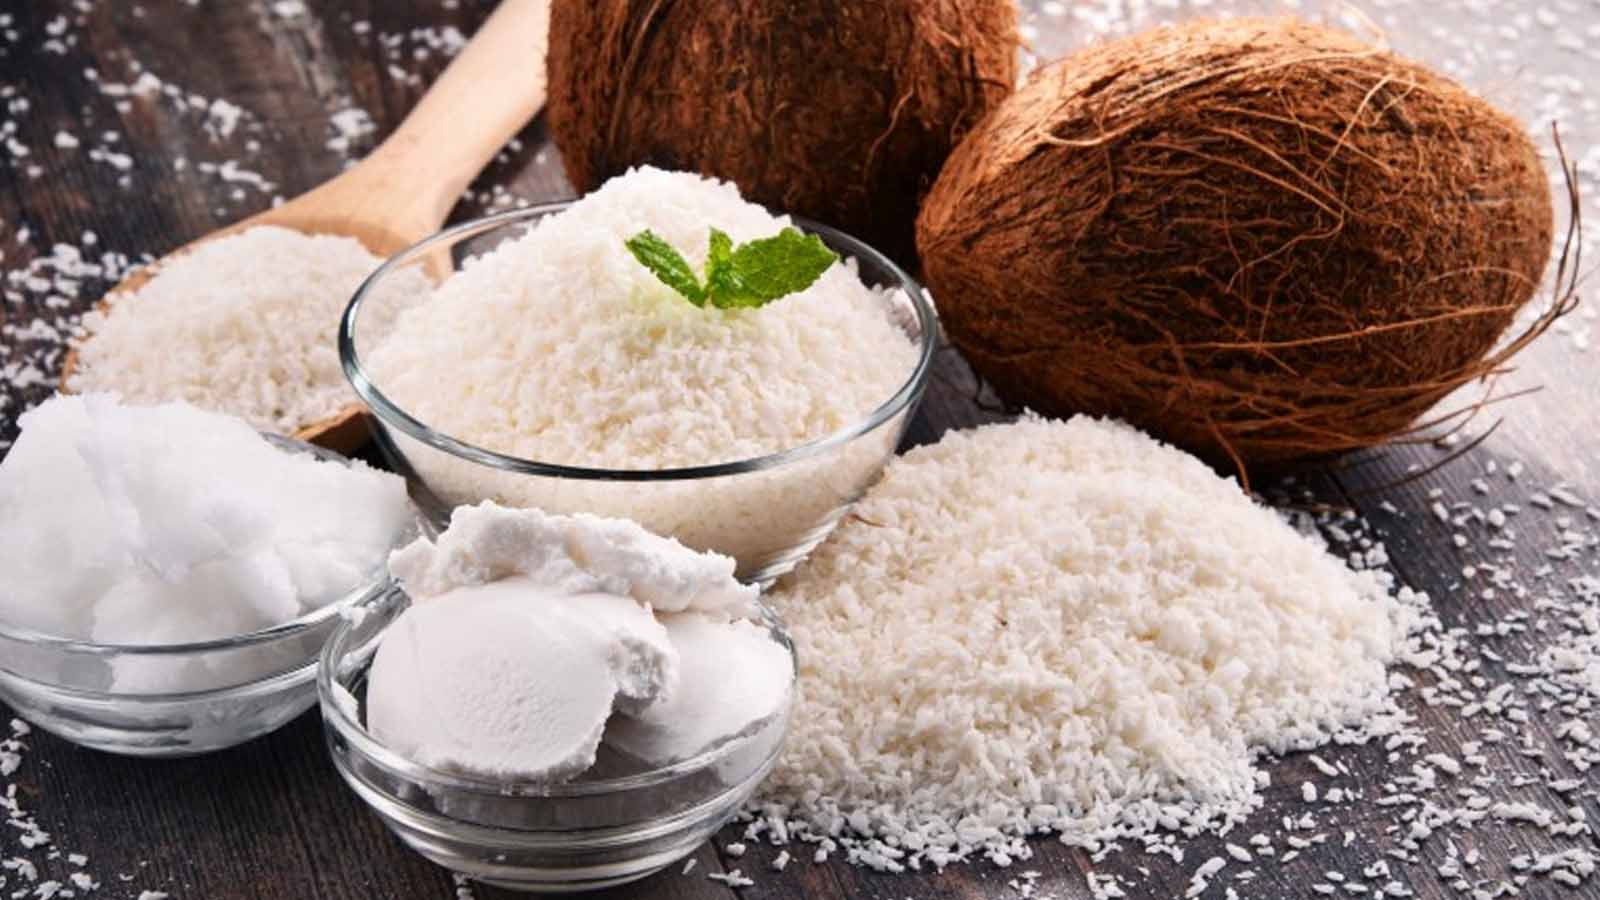 R M R COCONUT PRODUCTS EXPORTERS